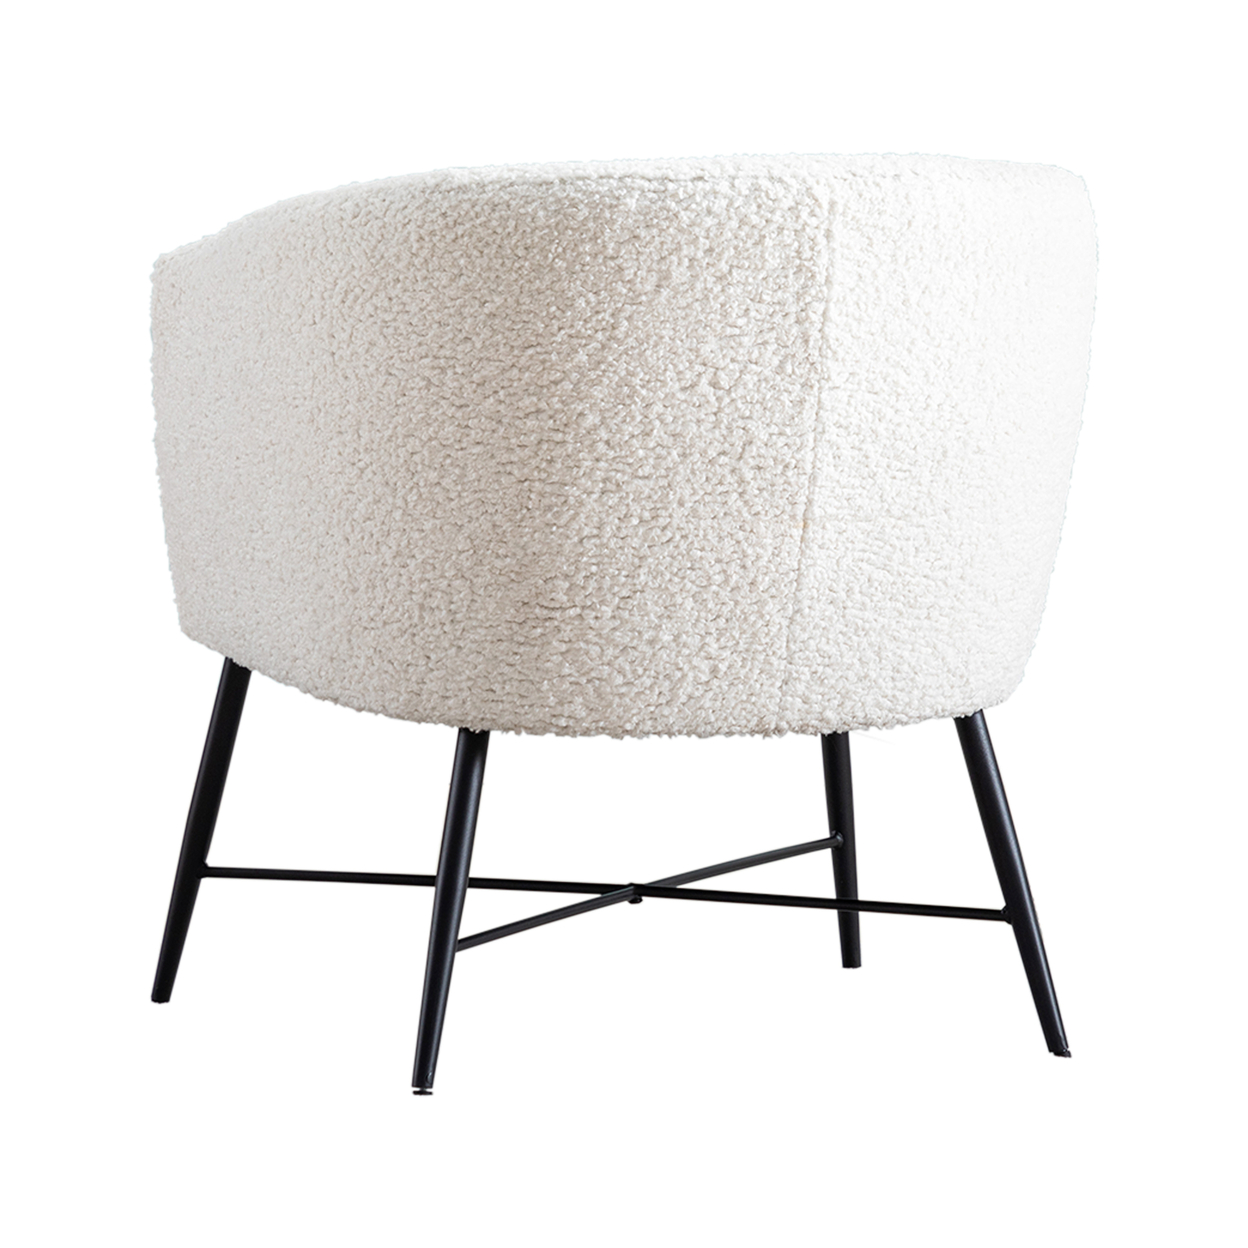 Ino 28 Inch Accent Chair, White Wool Like Fabric, Curved Back, Shelter Arms- Saltoro Sherpi